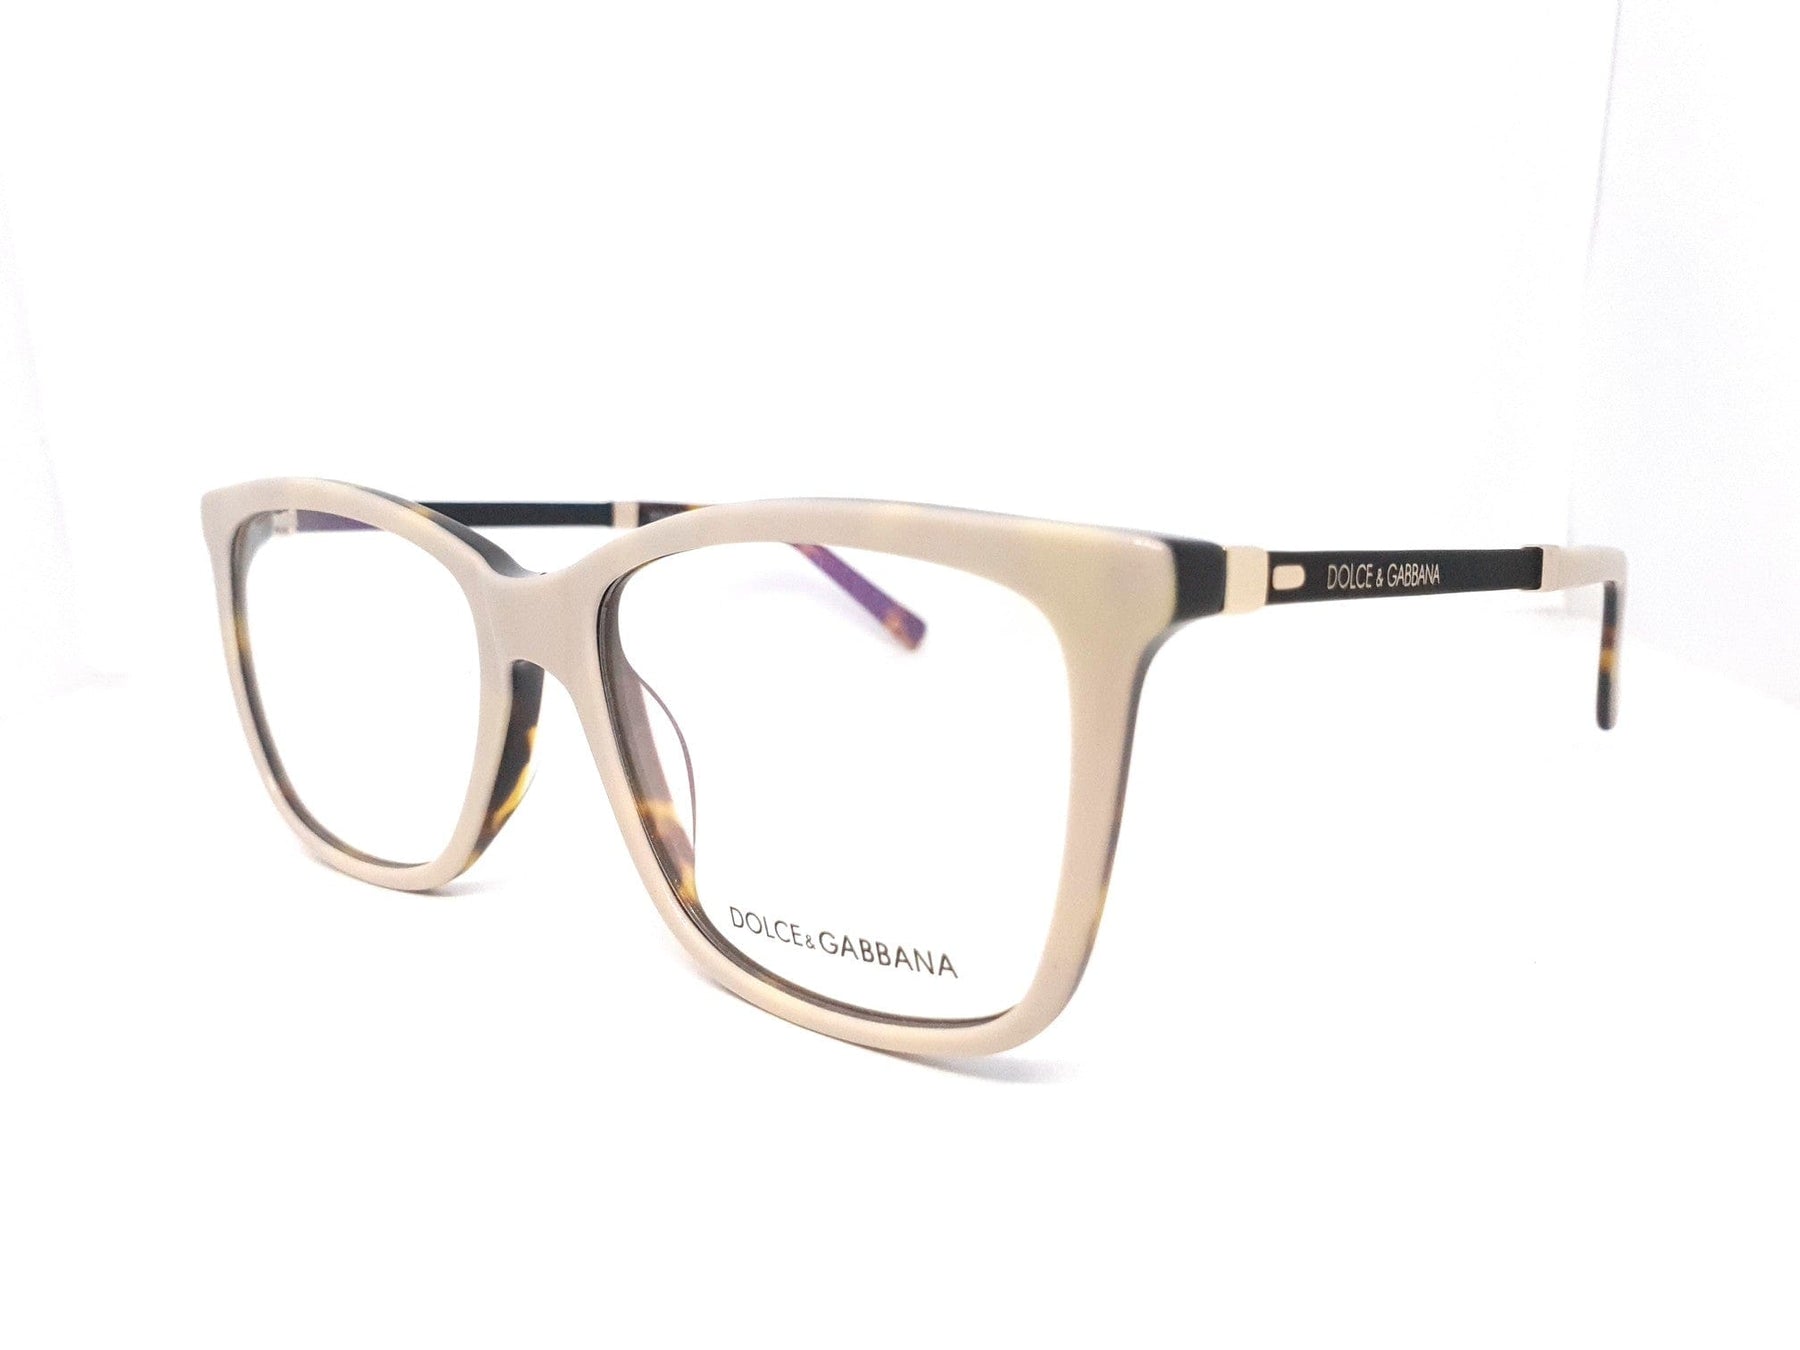 Dolce & Gabbana DG3126-C9N exclusive at Store